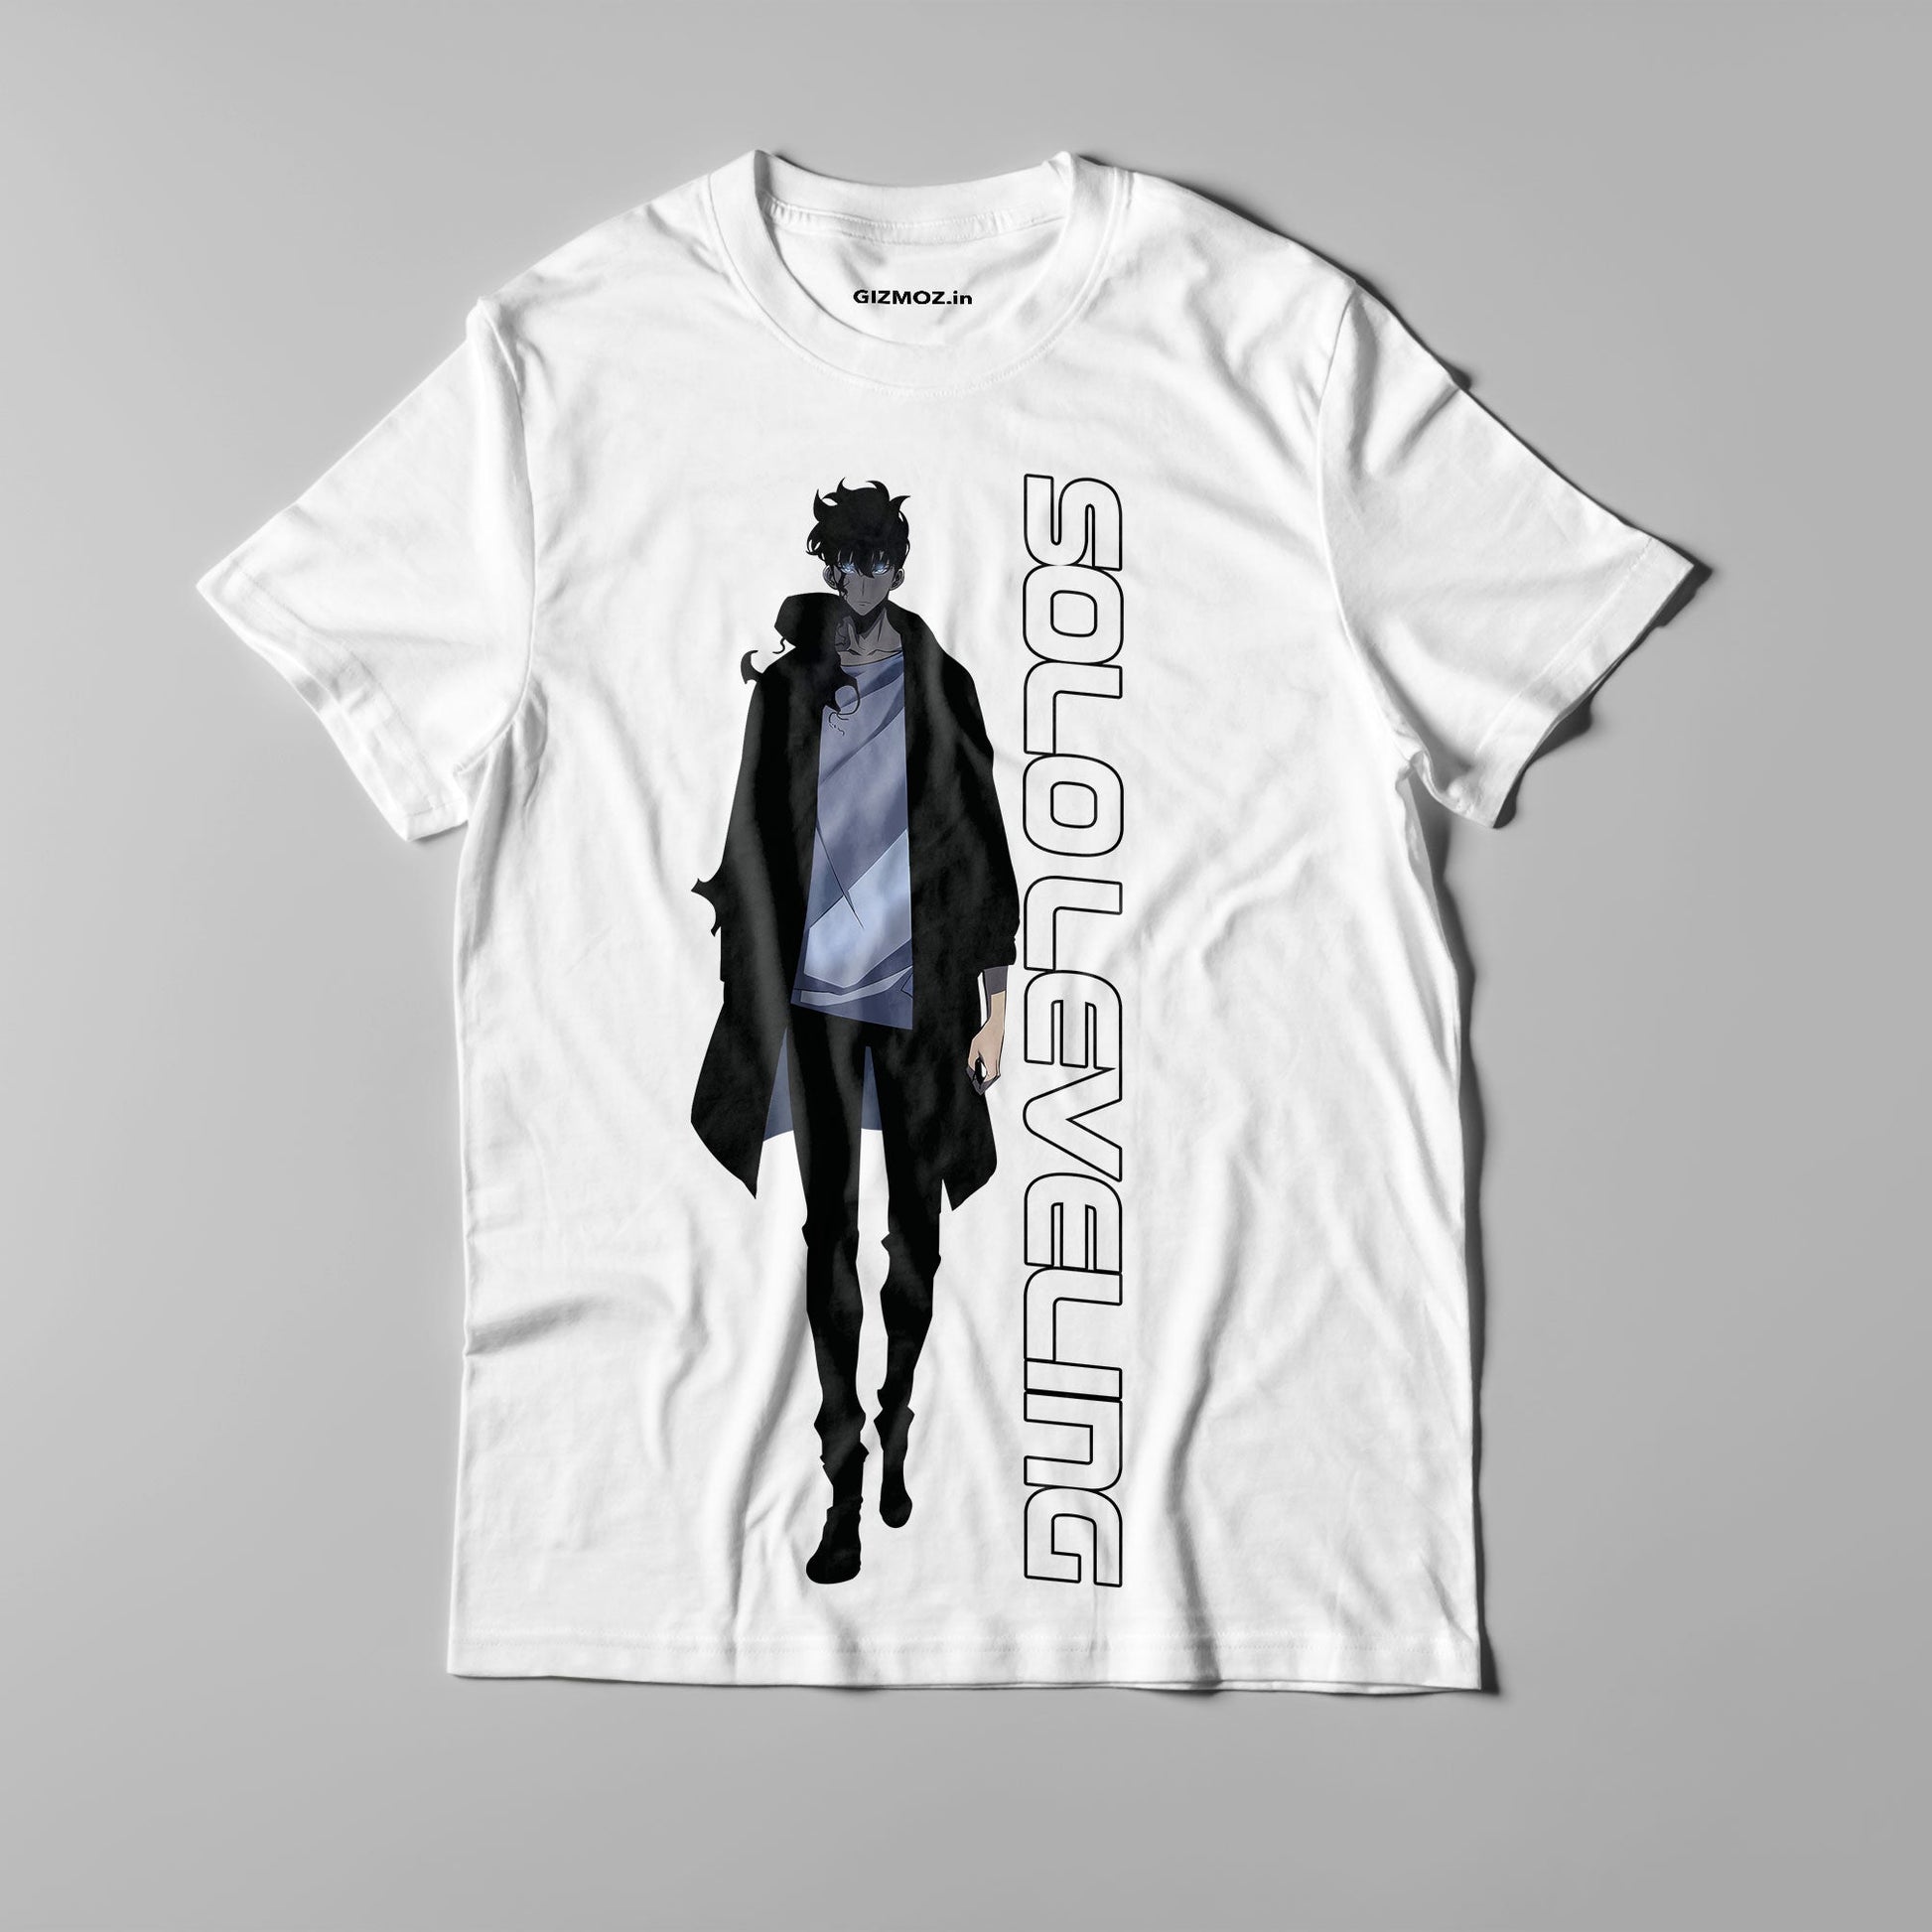 Solo Leveling Tshirt White - Gizmoz.in